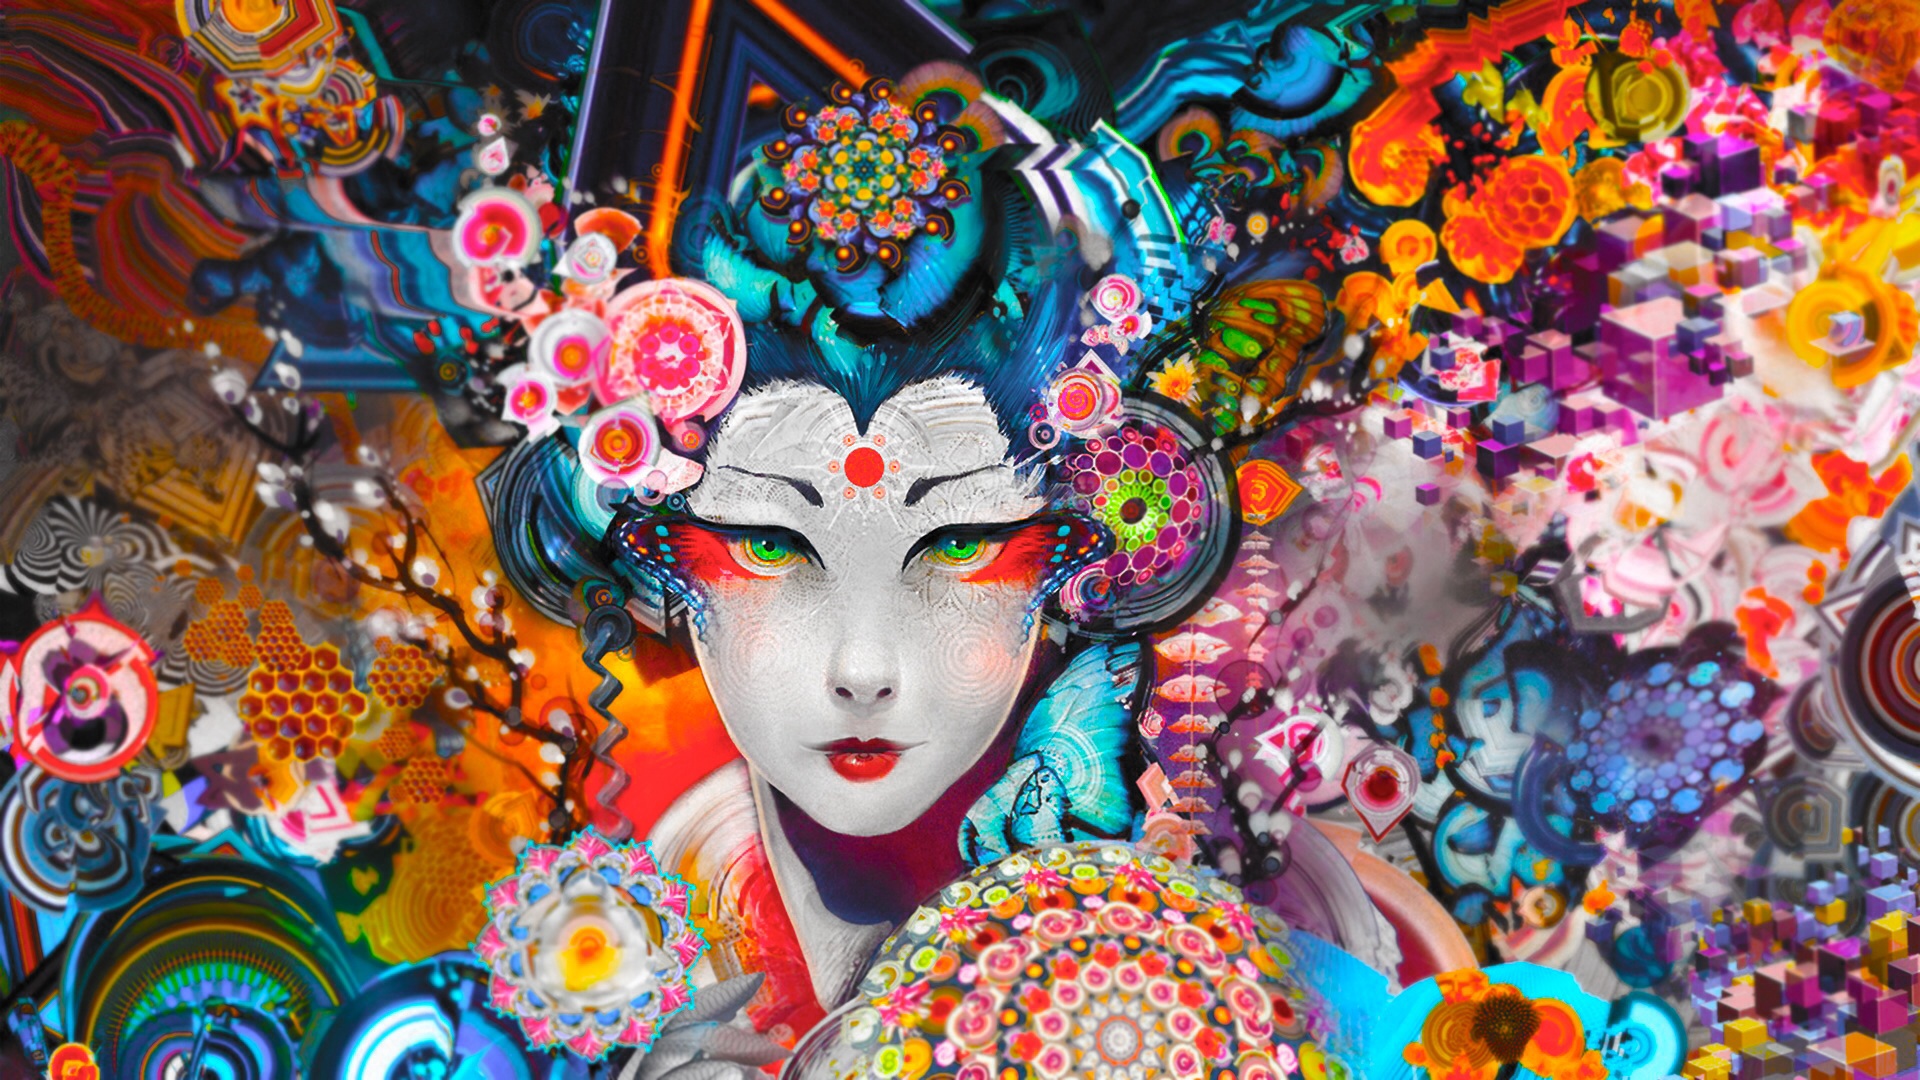 android wallpaper tumblr,peking opera,psychedelic art,art,painting,colorfulness